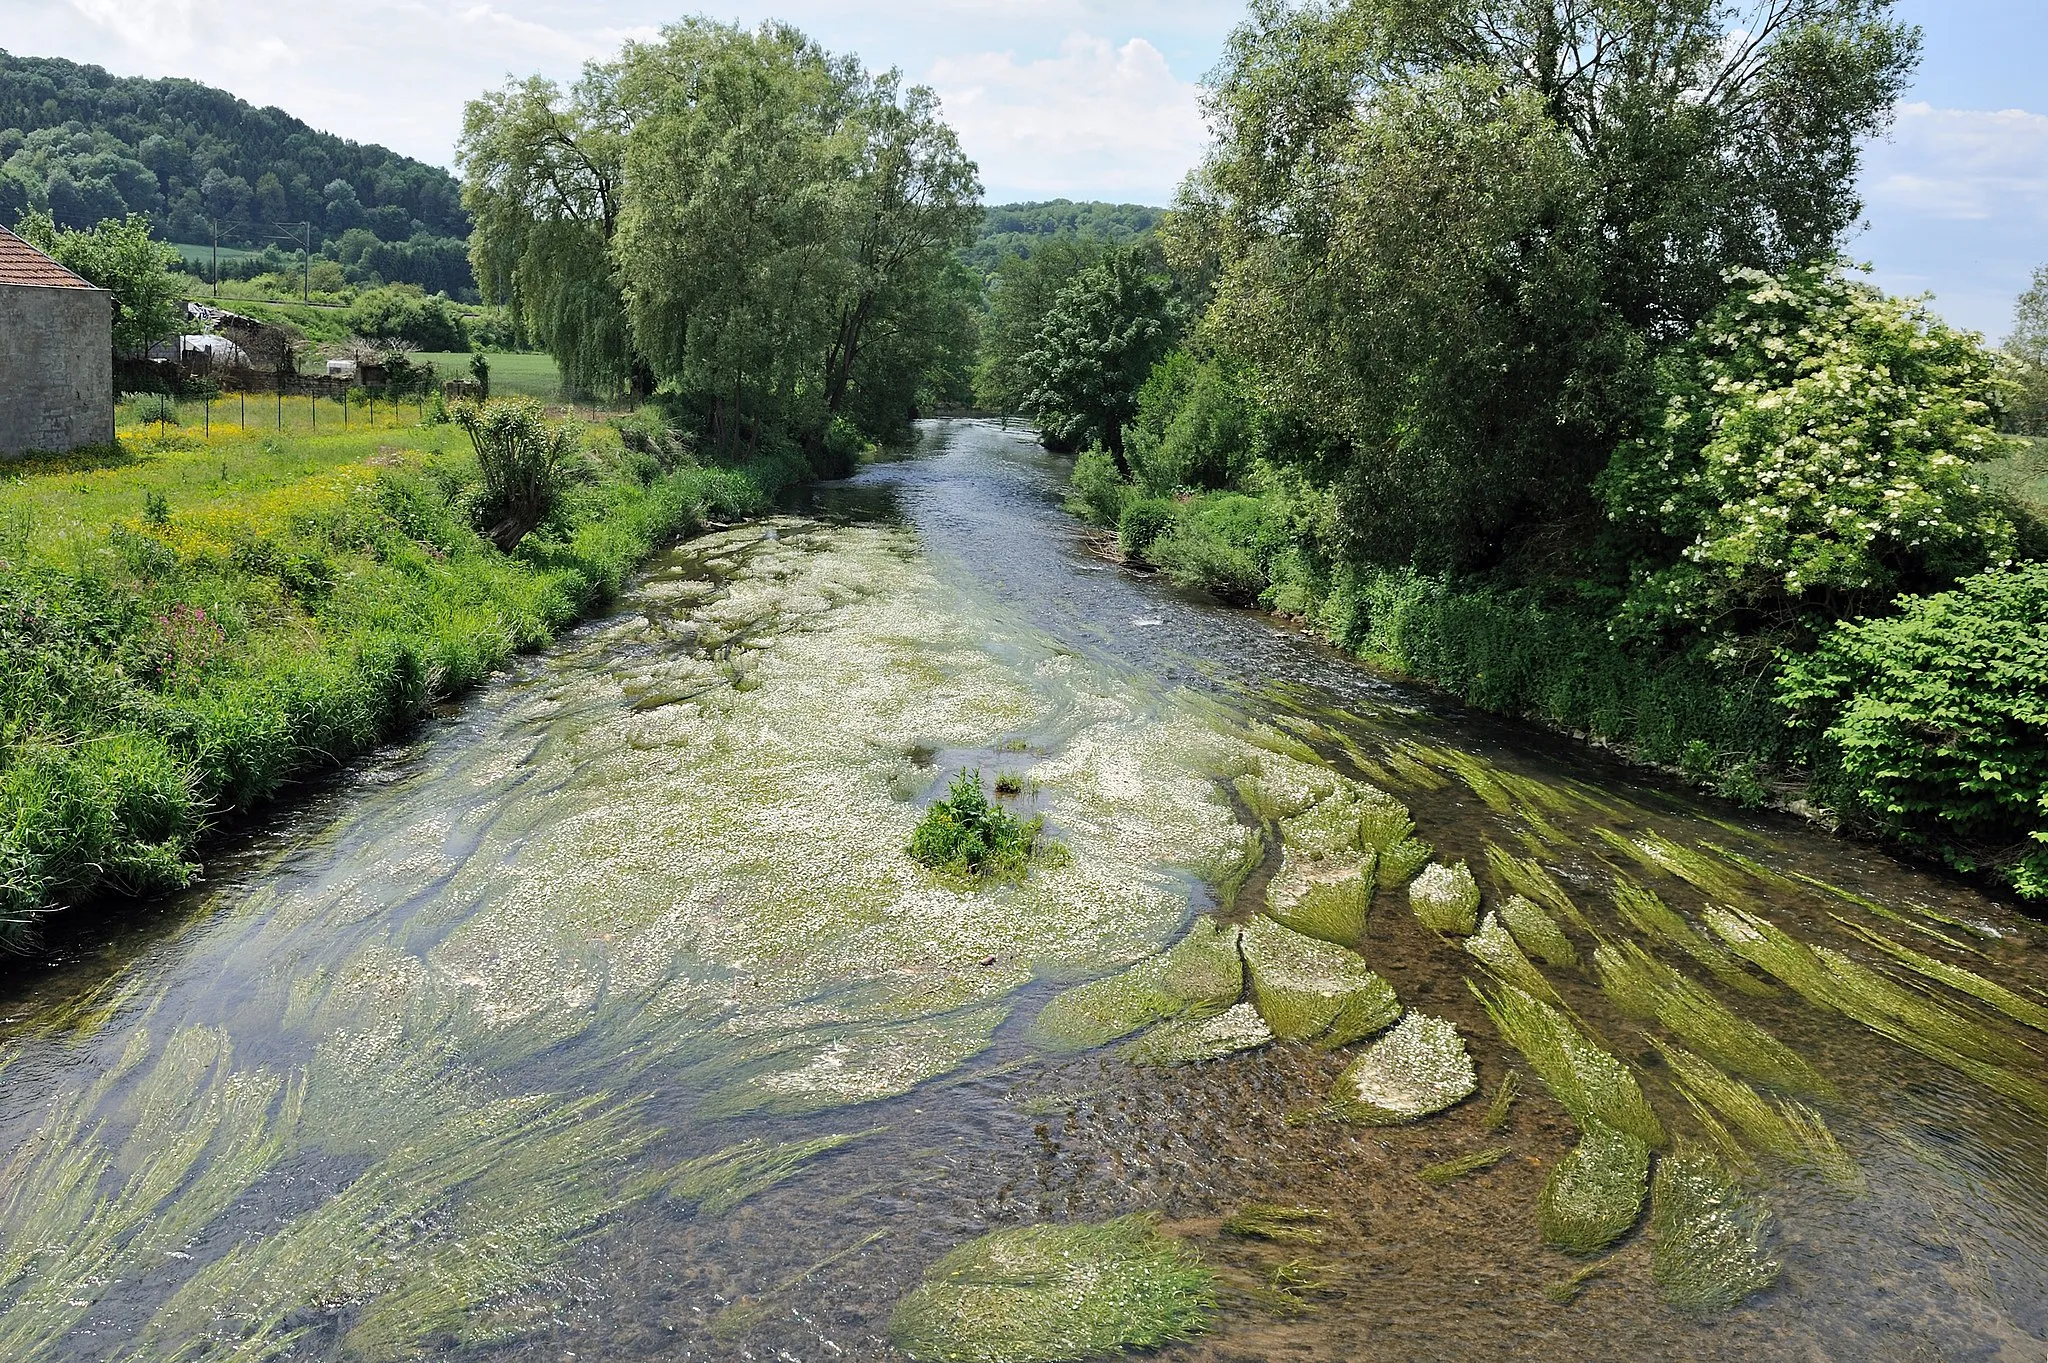 Photo showing: The river Chiers seen from the bridge that crosses the river at Charency-Vezin, department of Meurthe-et-Moselle, region of Lorraine (France)